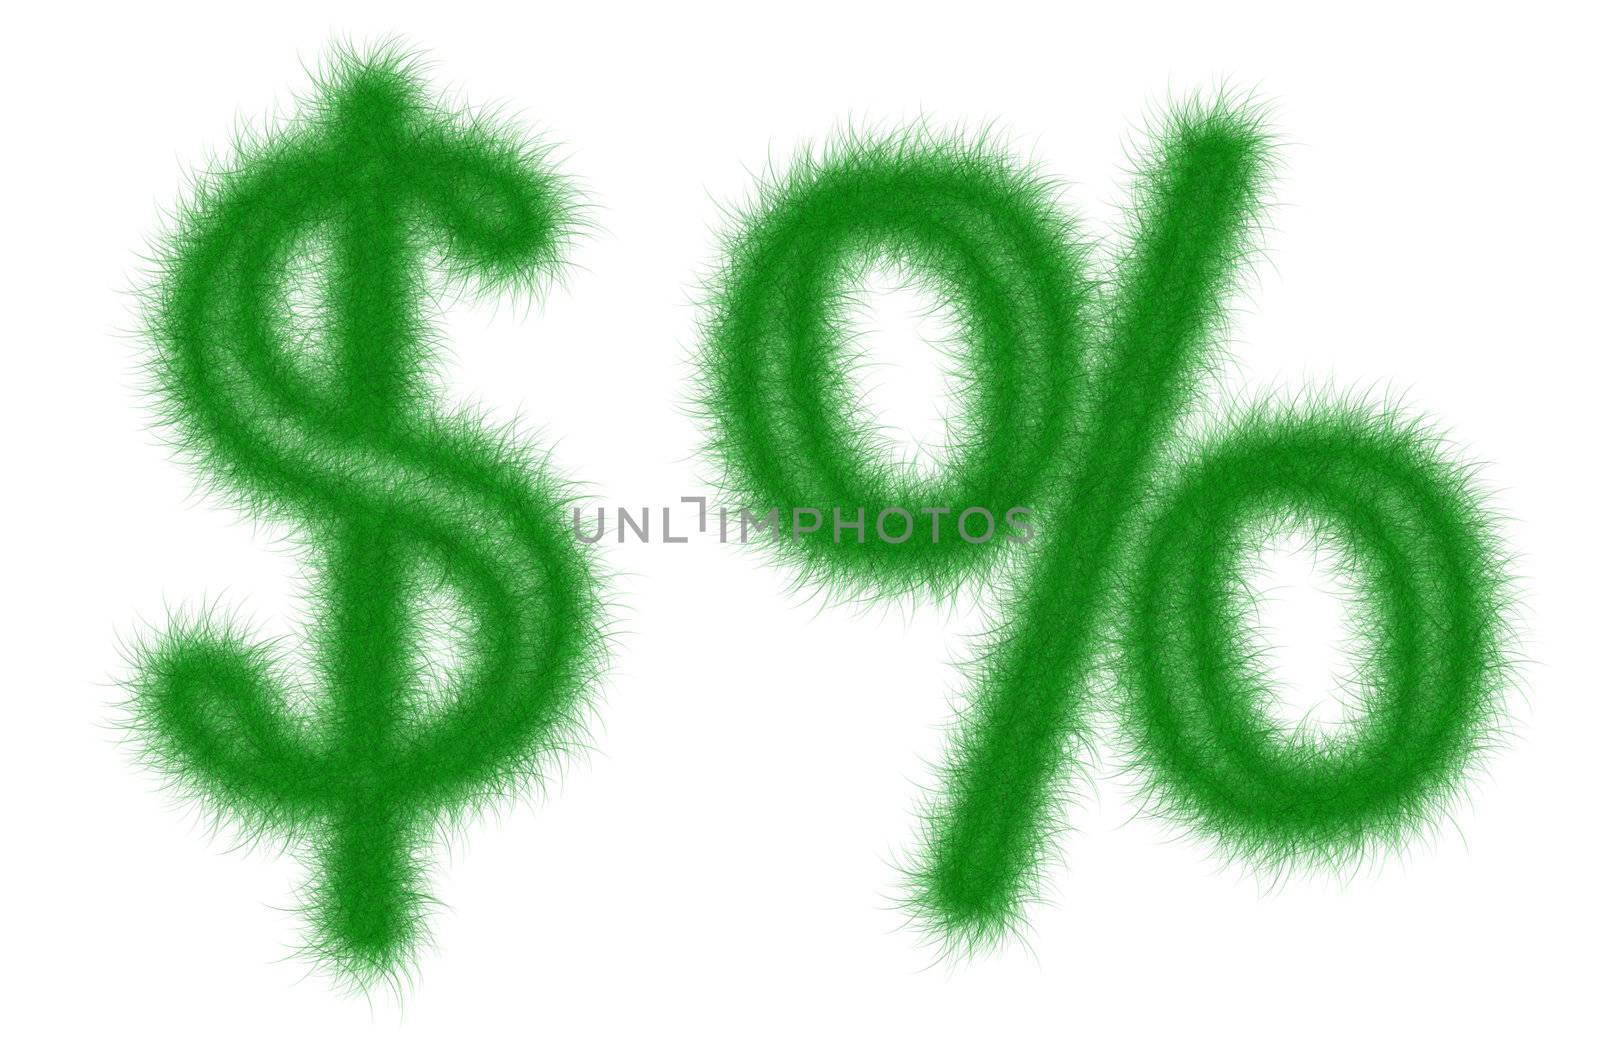 Green grass font isolated on white background by mozzyb